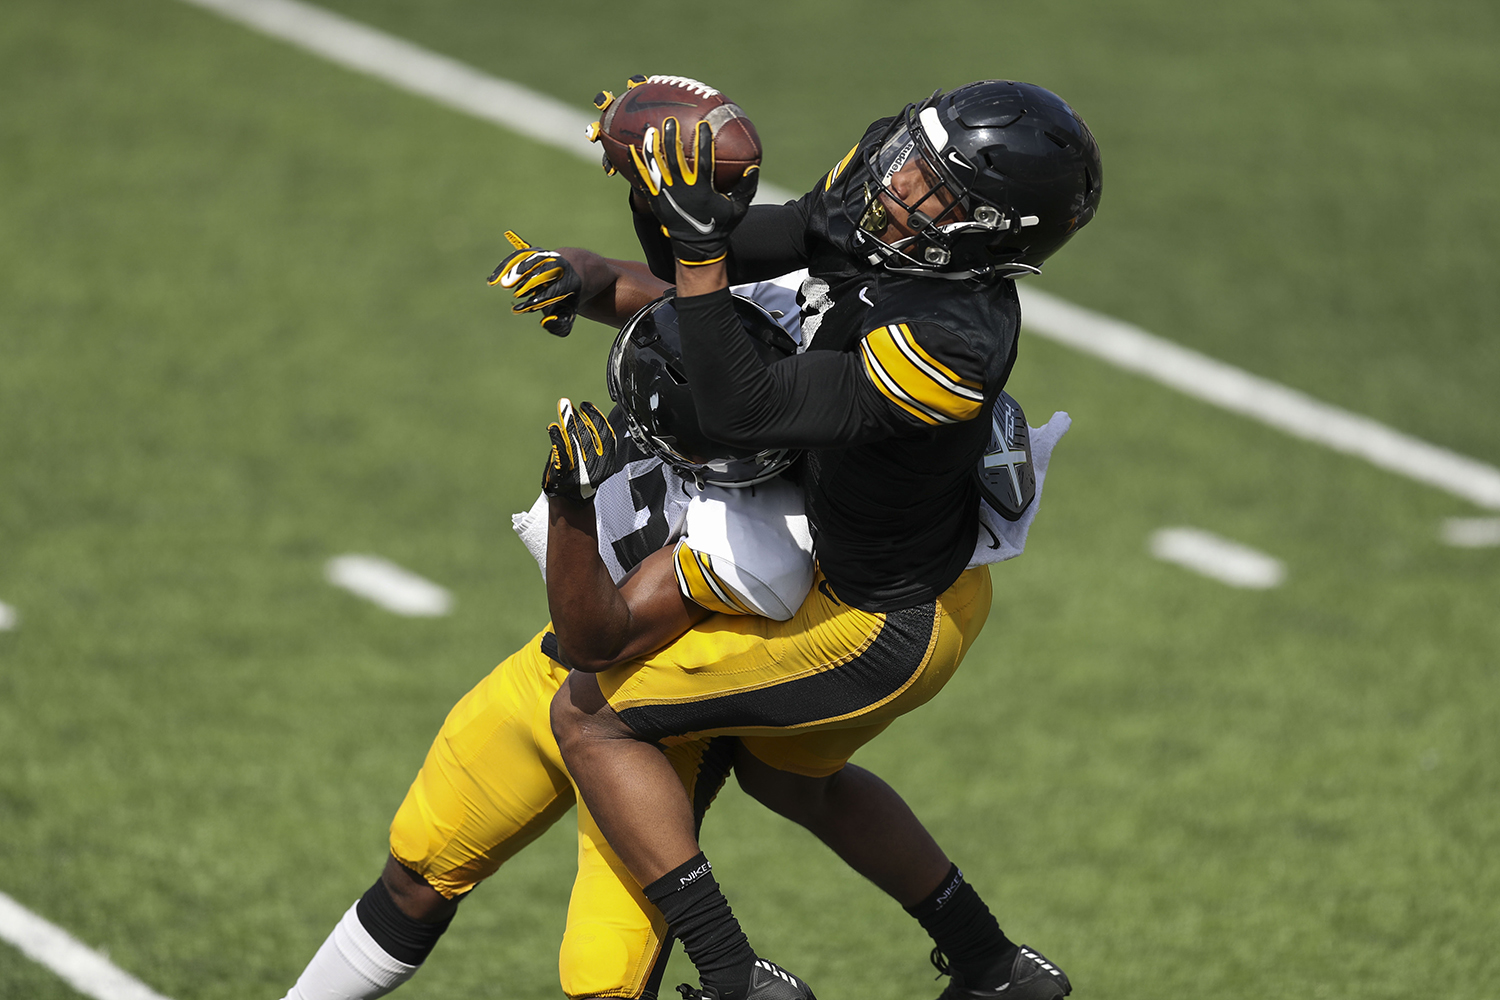 Opinion Observations from the Iowa football team's open spring